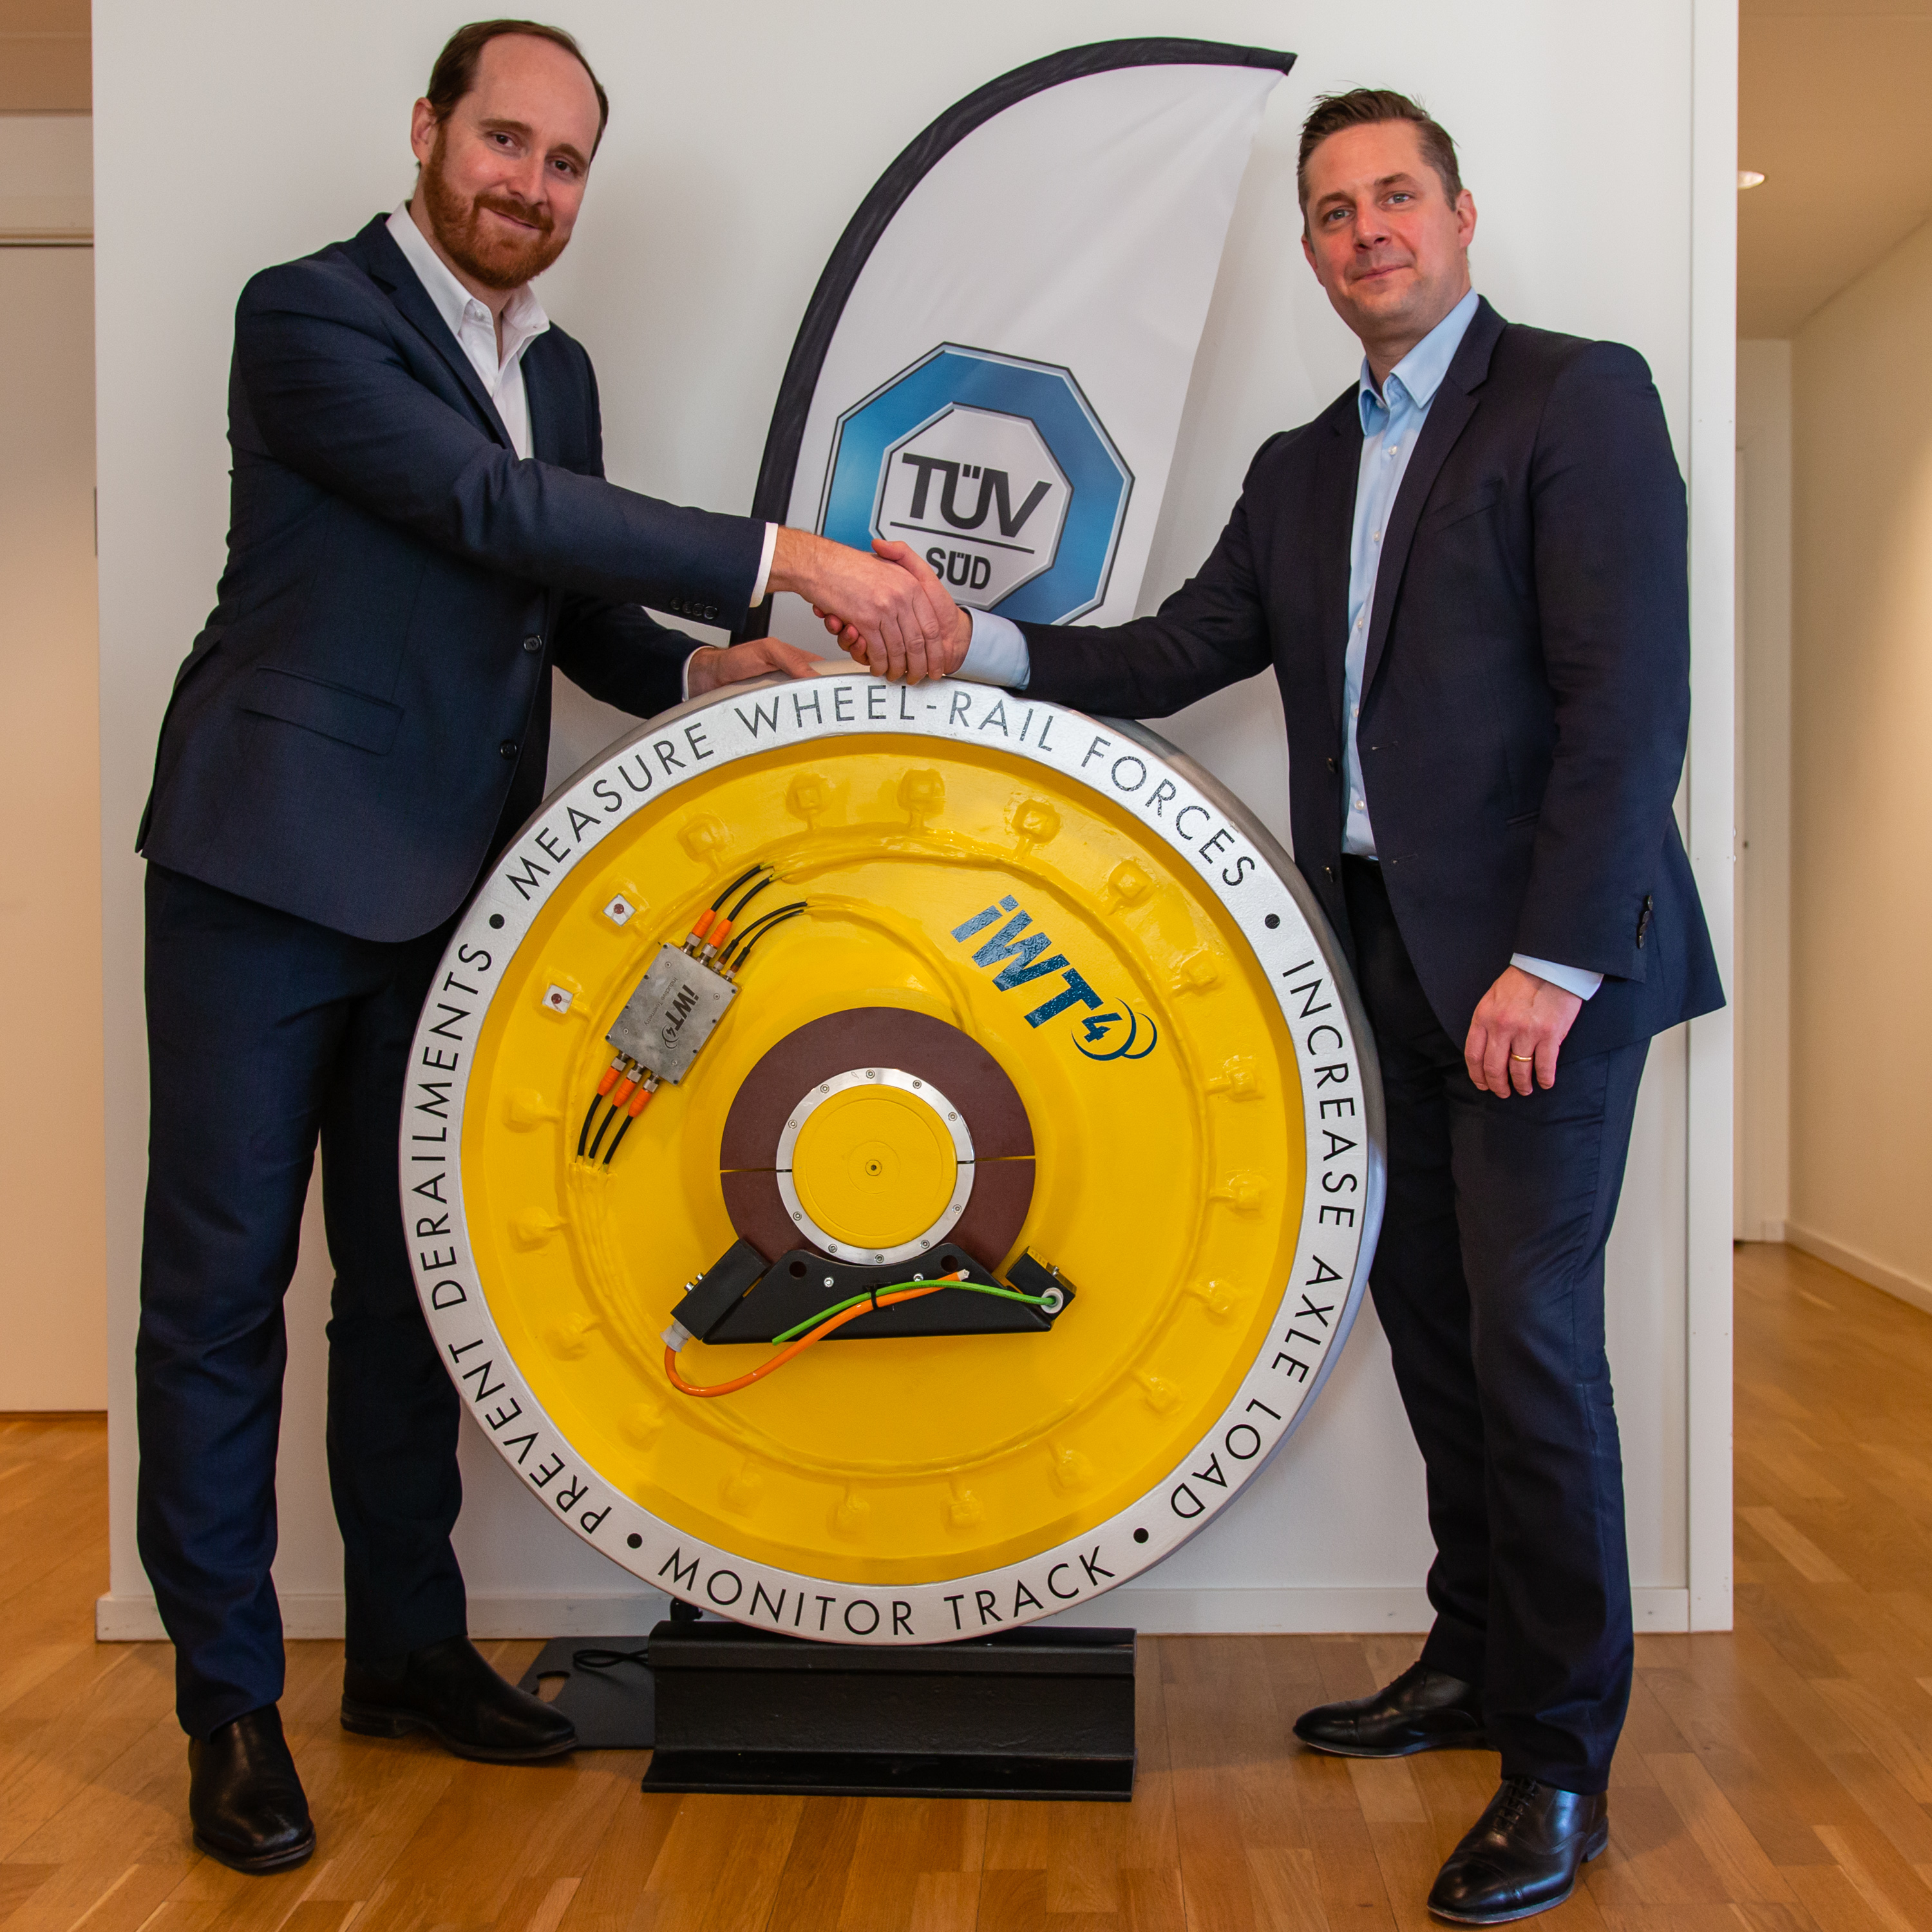 TÜV SÜD has acquired the IWT4 Instrumented Wheelset technology: Greg Riggall (left), General Manager Rail, TÜV SÜD Sweden, and Mikael Åhlen, CEO Sweden, SNC Lavalin Rail & Transit AB.